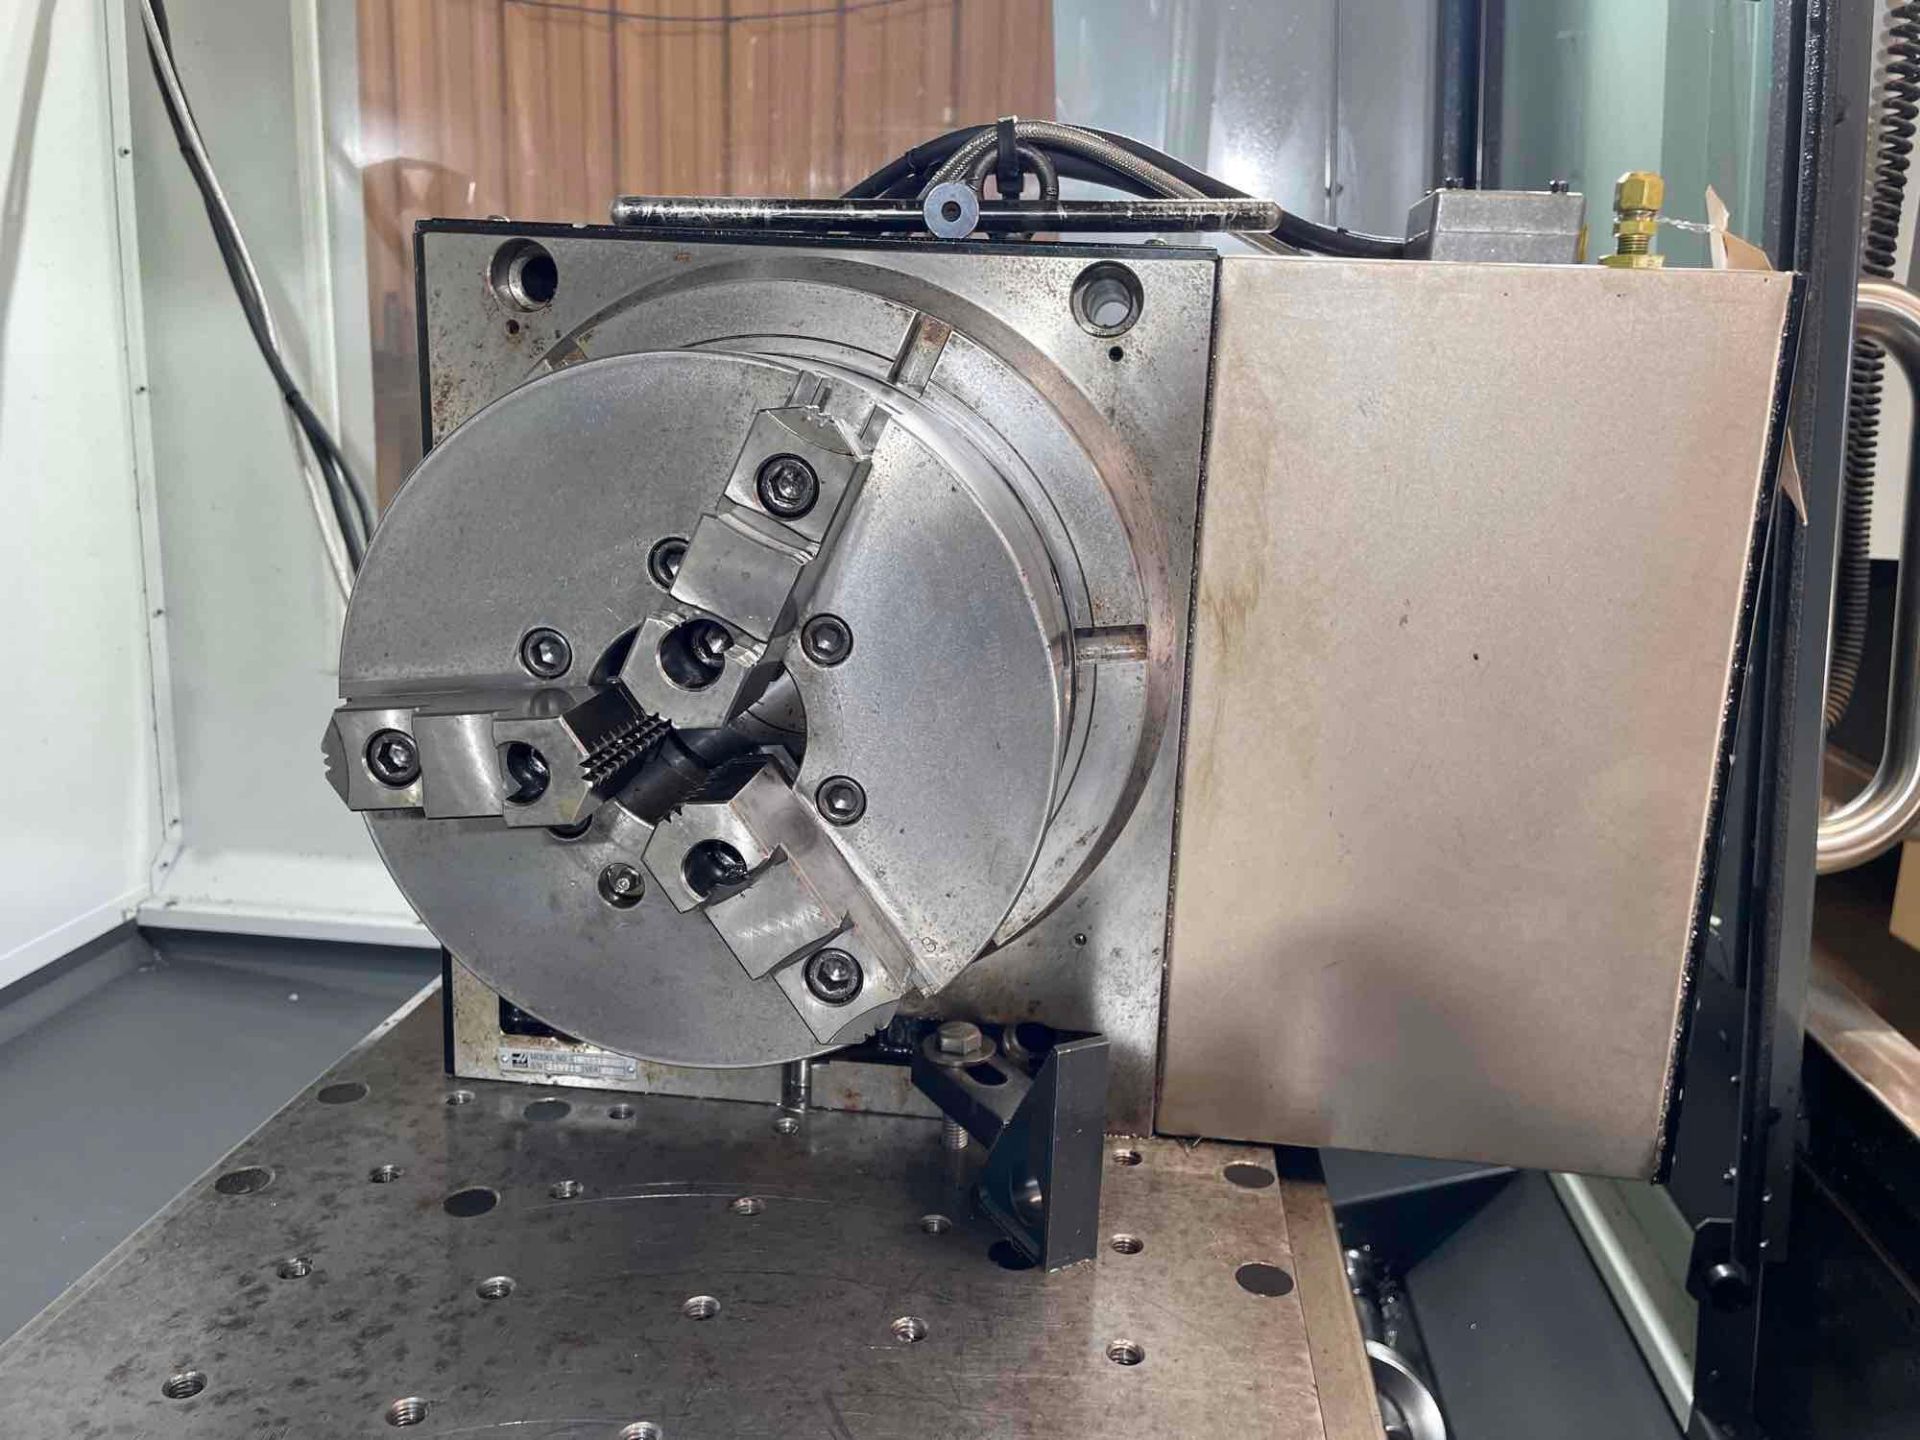 Haas 4th Axis with 10” LMC 3 Jaw Chuck for Haas - Image 5 of 6